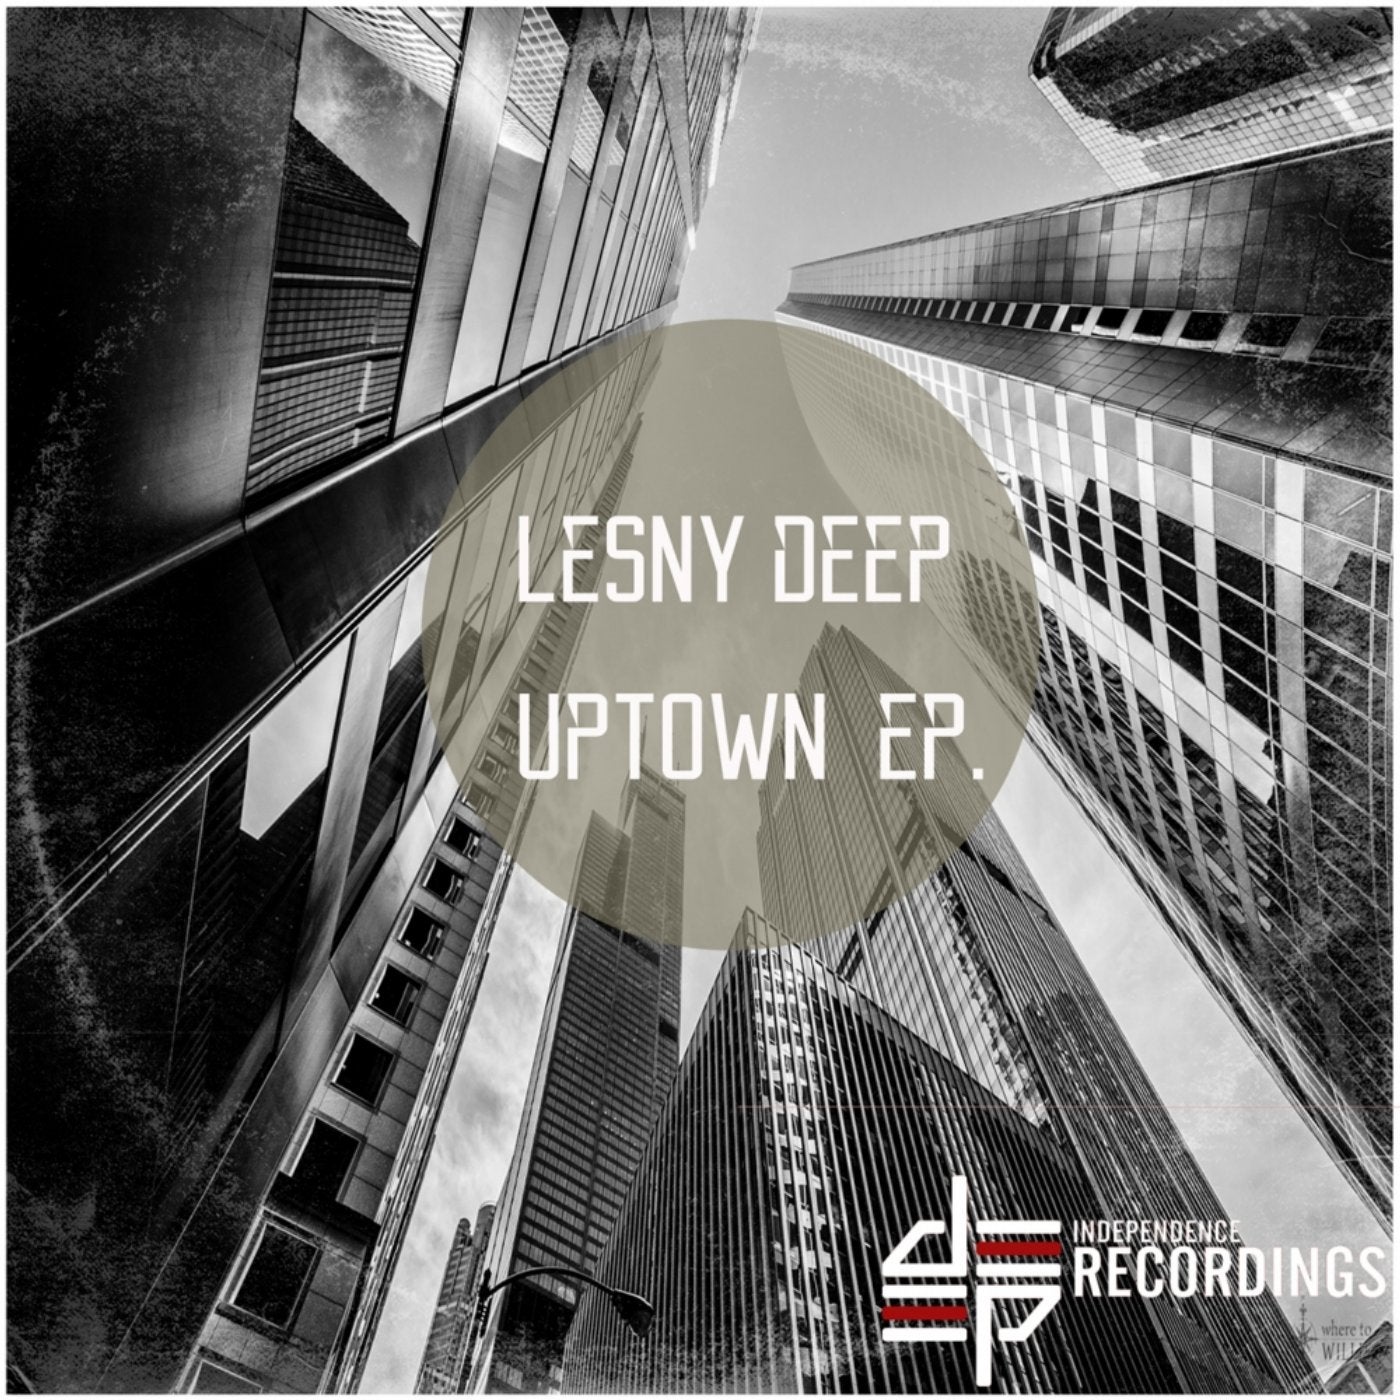 Uptown EP